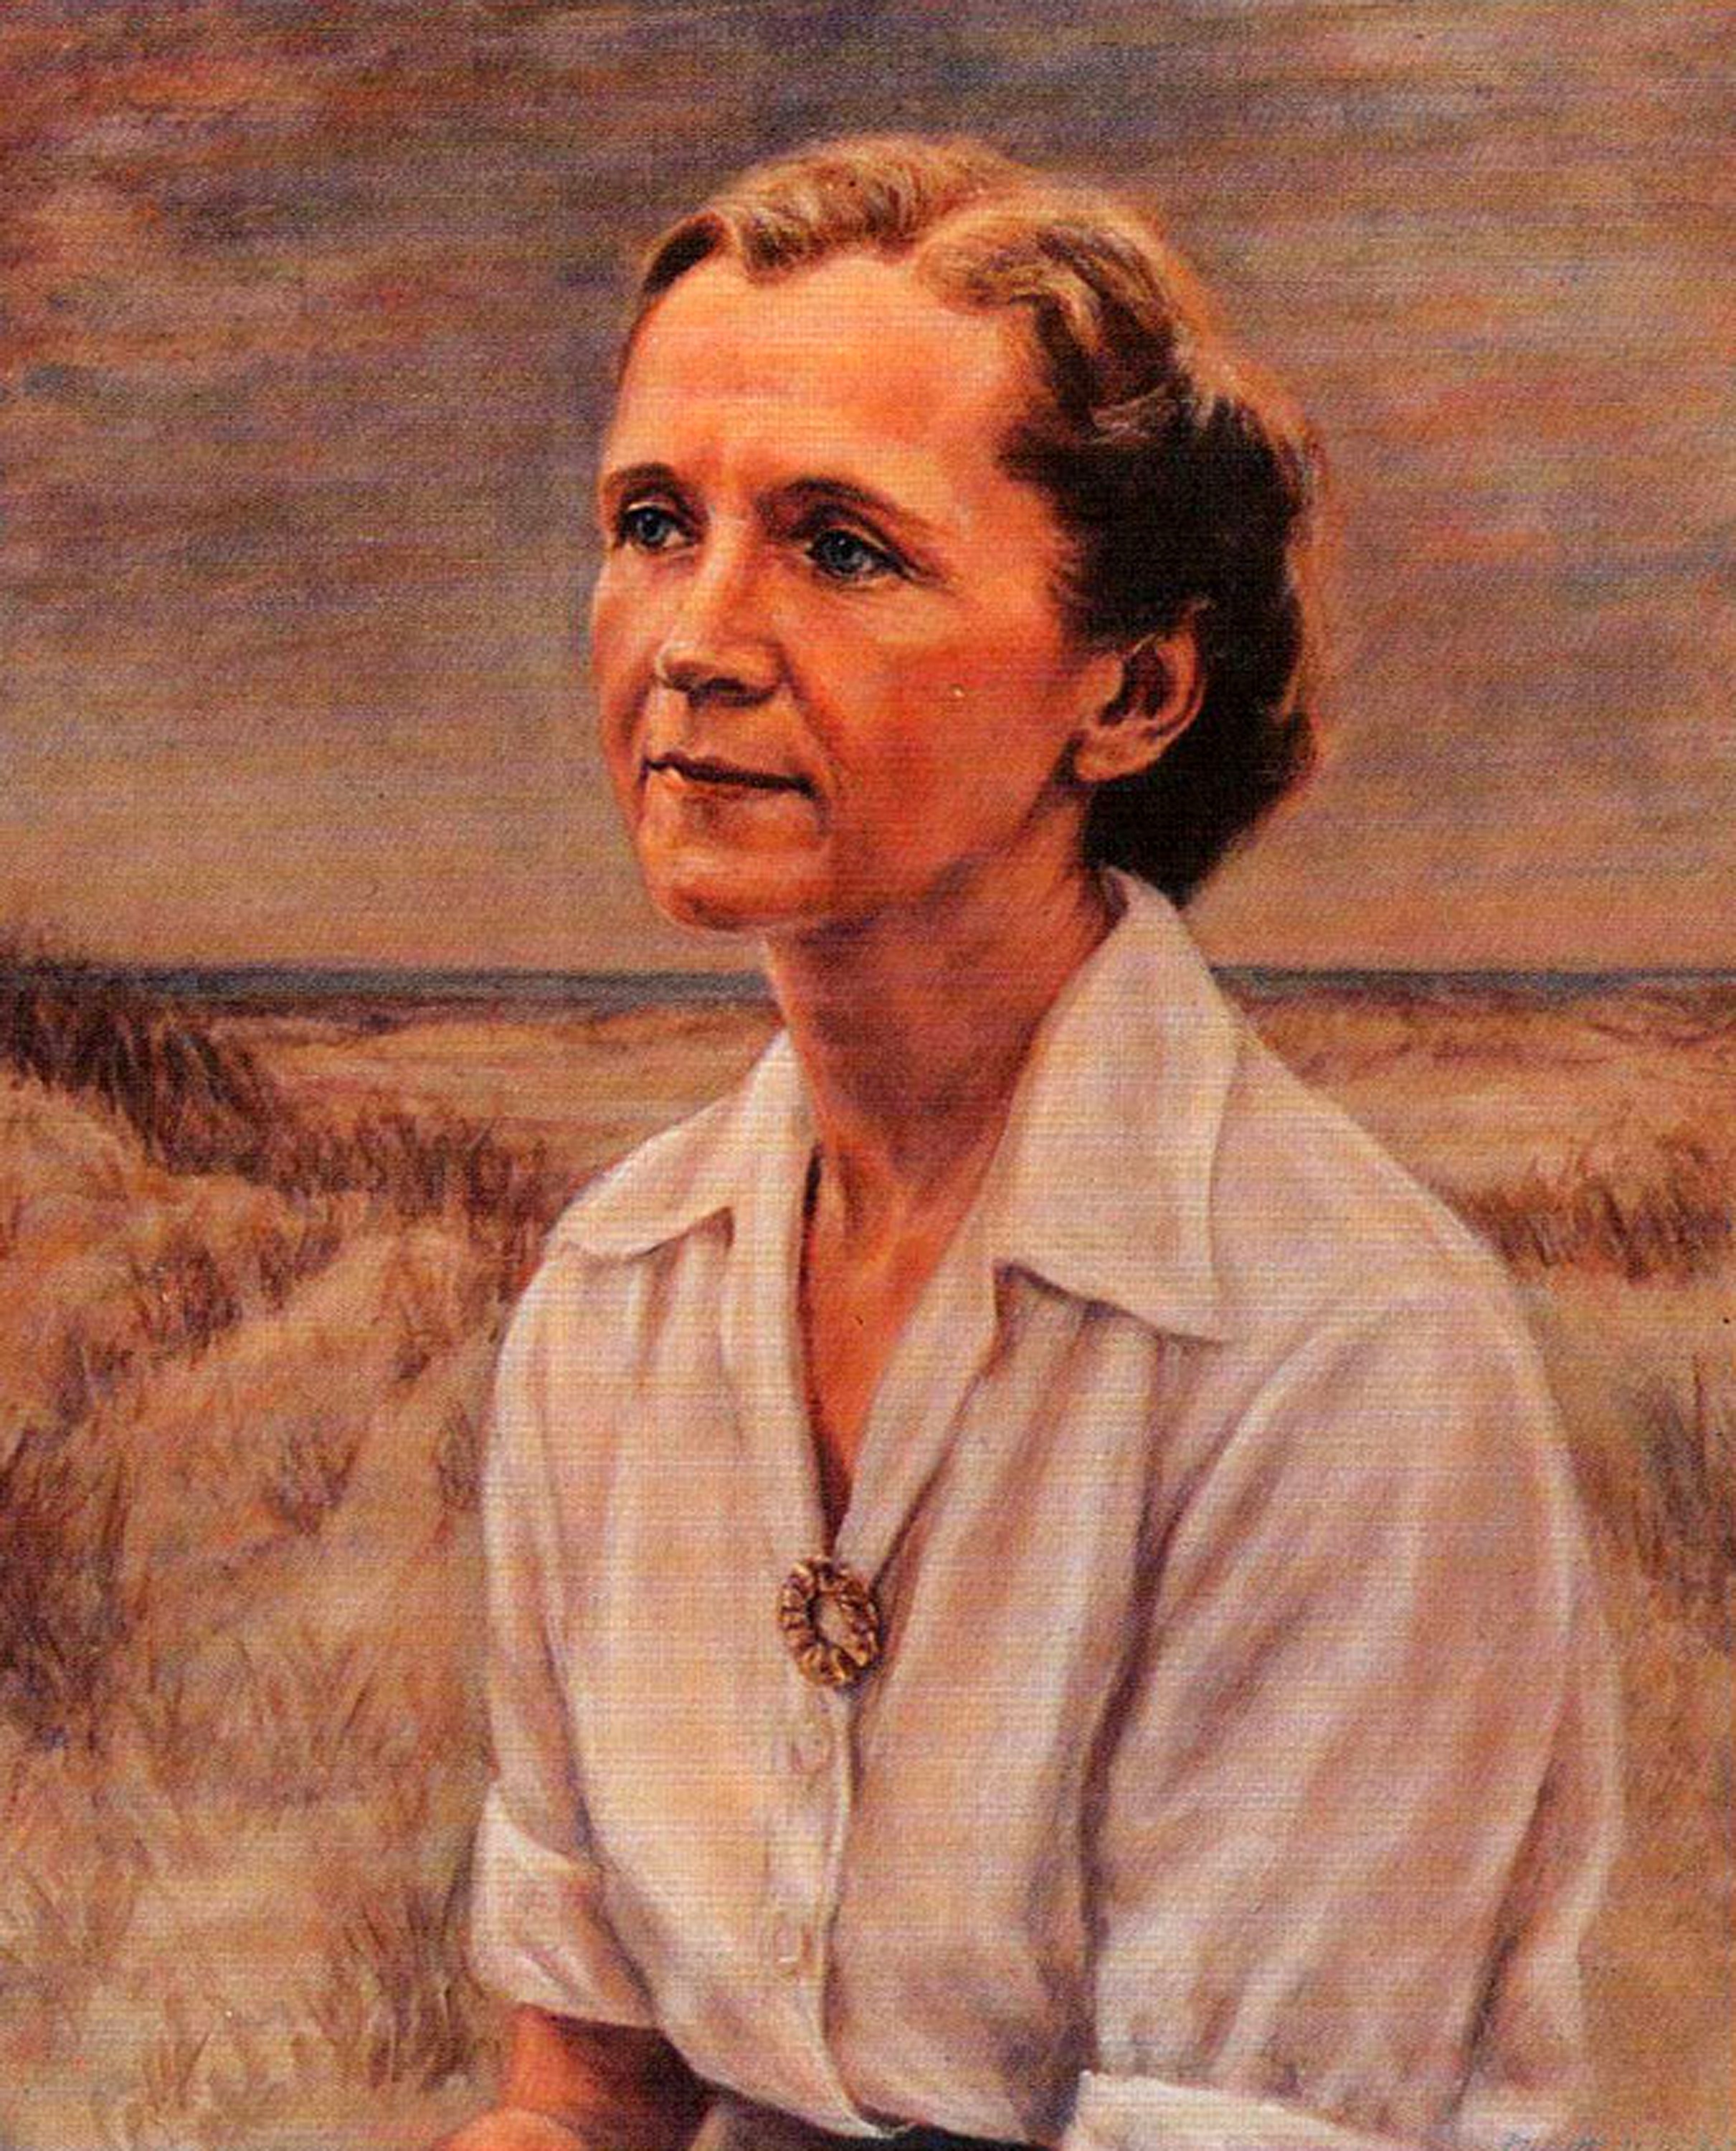  Rachel Carson, conservationist and  Silent Spring  author   Photo credit:&nbsp;Chatham University Archives, Pittsburgh, Pa  